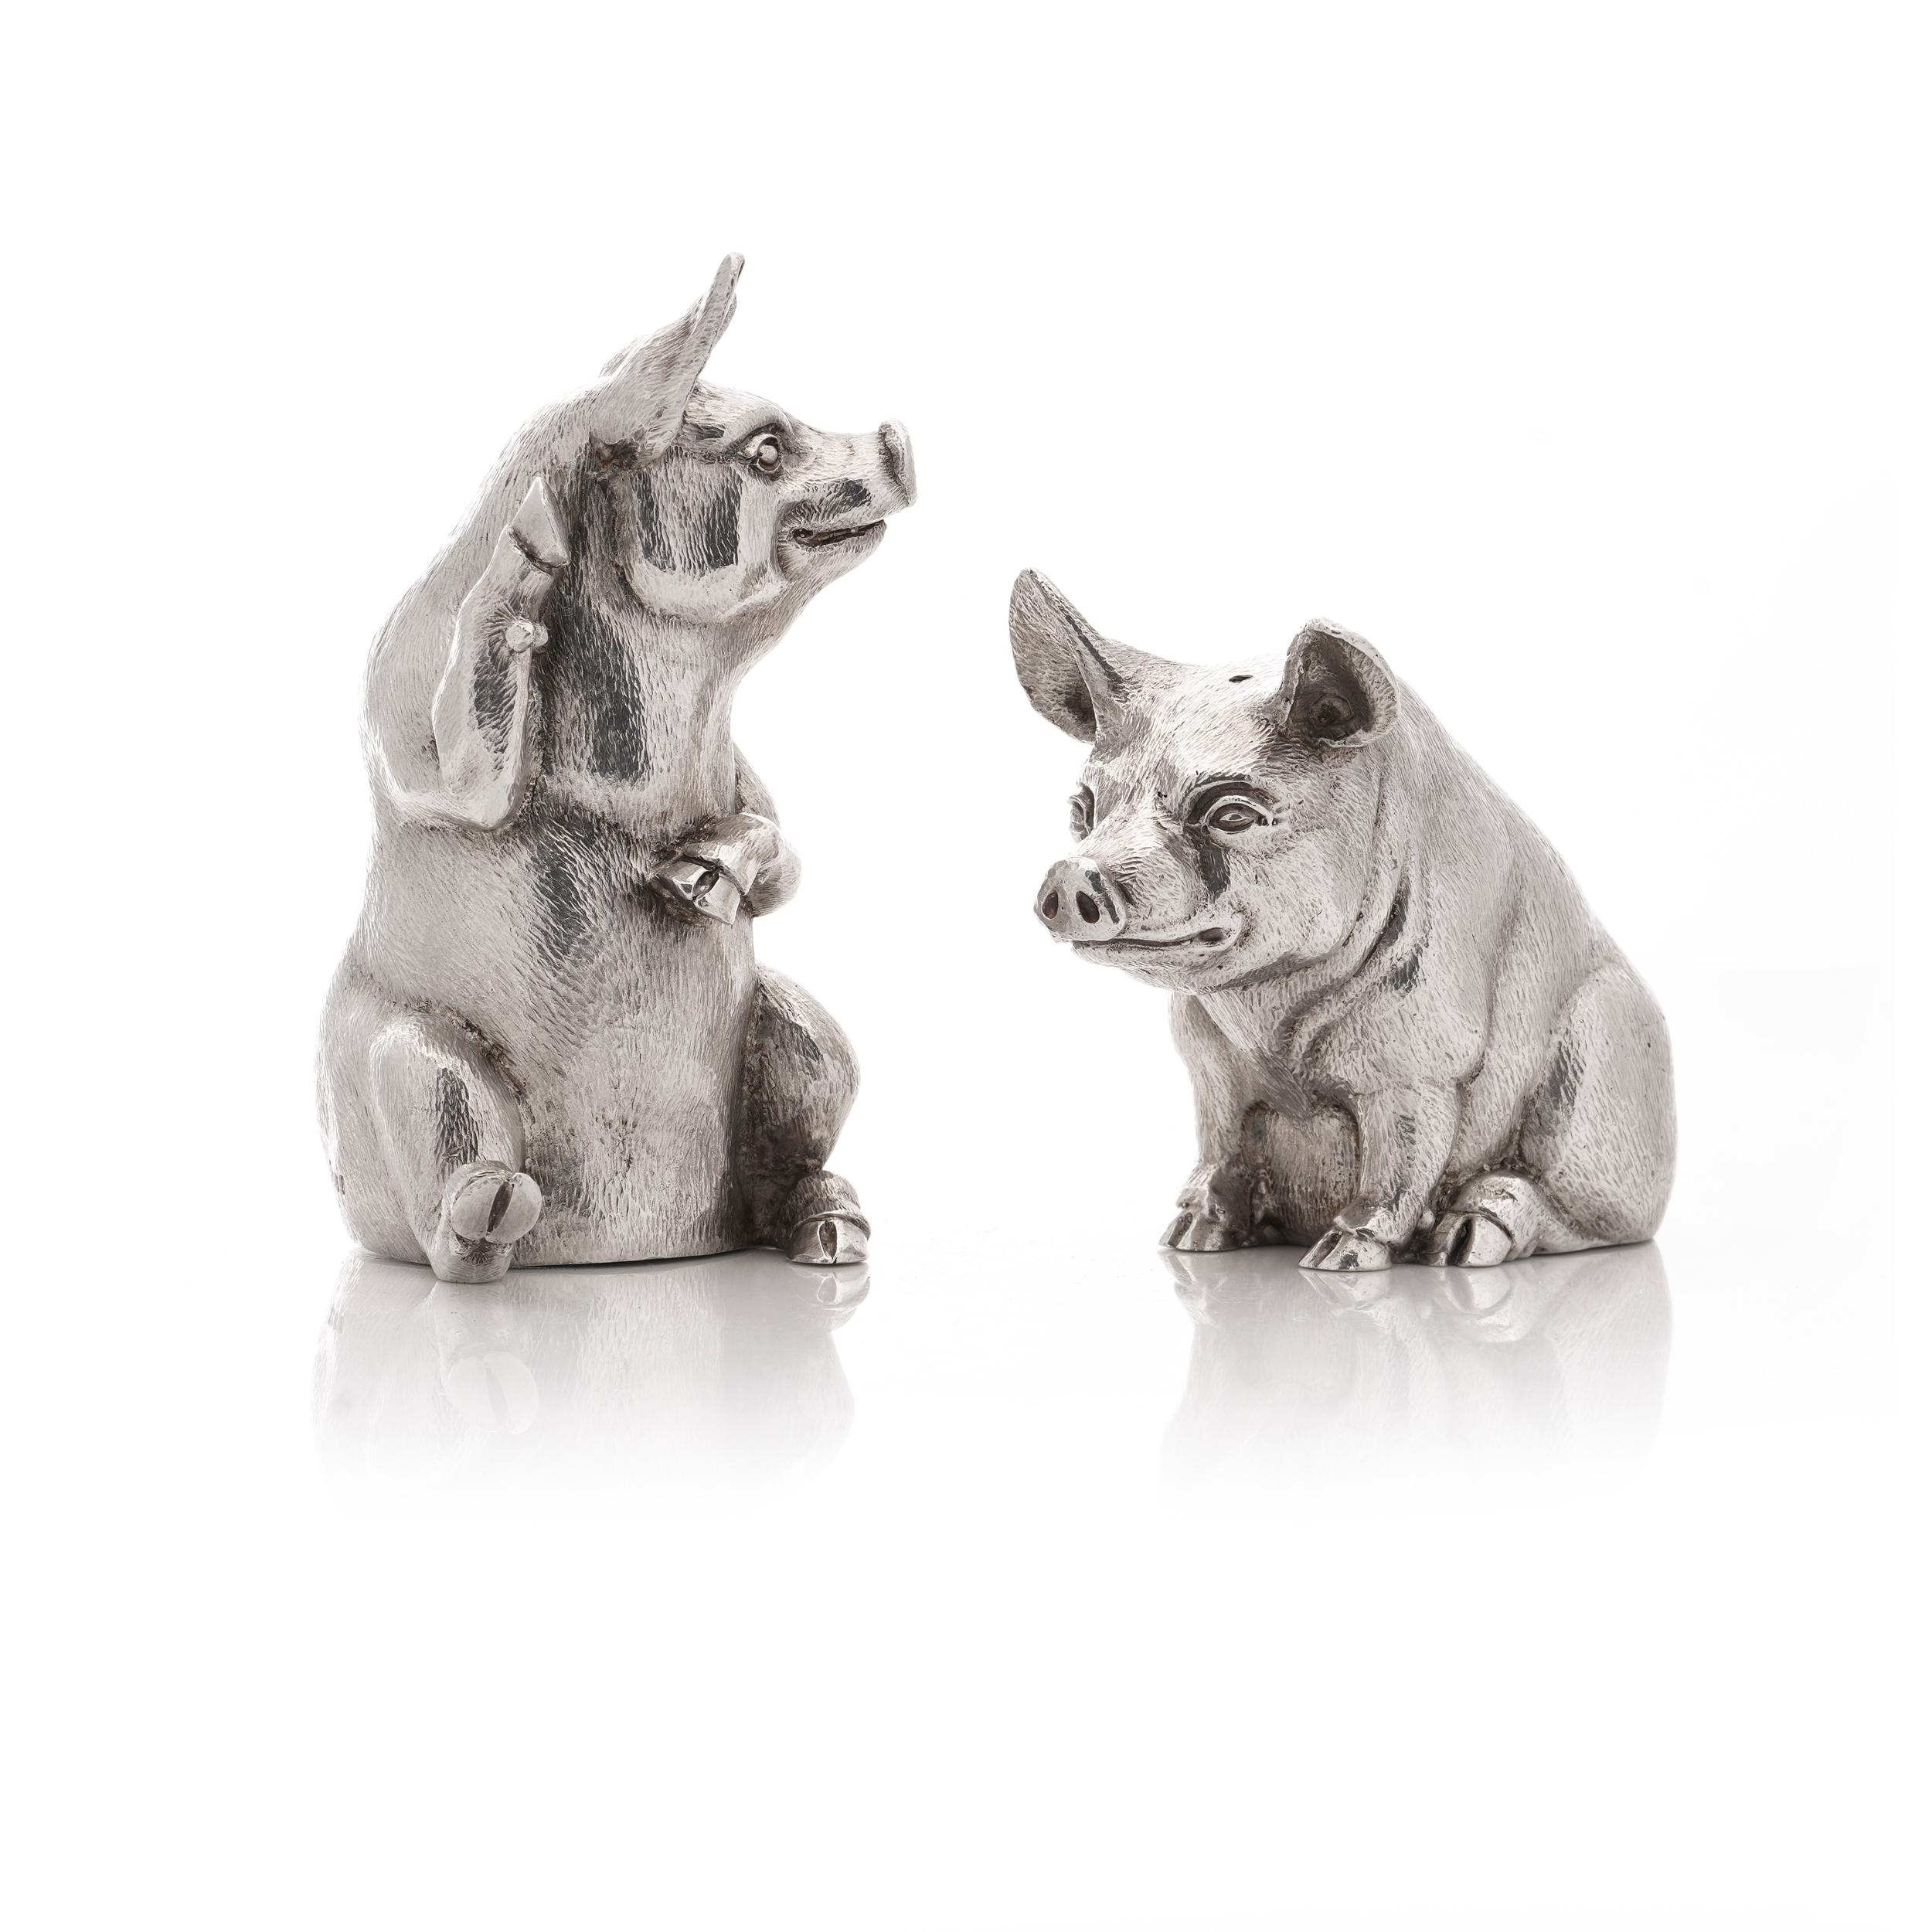 Vintage Late 20th century Novelty solid silver pair of salt and pepper shakers in a shape of a pigs.
Made in England, London, 1990
Maker: William Comyns & Sons Ltd
Fully hallmarked.

Dimensions:
1St pig size: Height x width: 9 x 5 cm
2nd pig size: